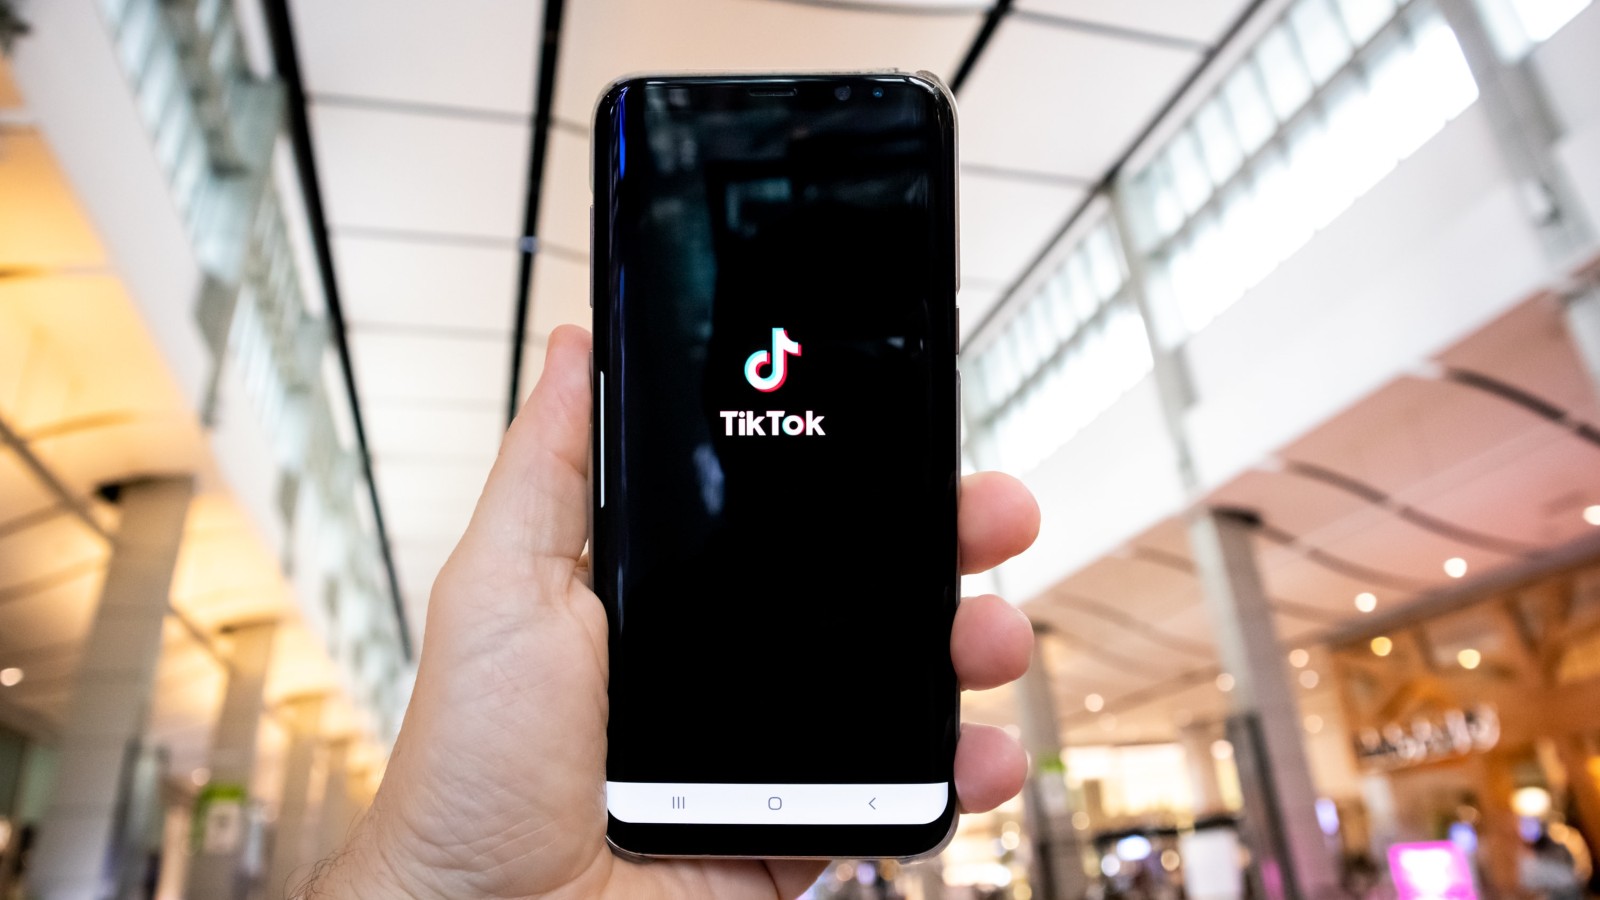 Keep up with ISRAEL21c latest content on its new TikTok account.Photo by Olivier Bergeron on Unsplash